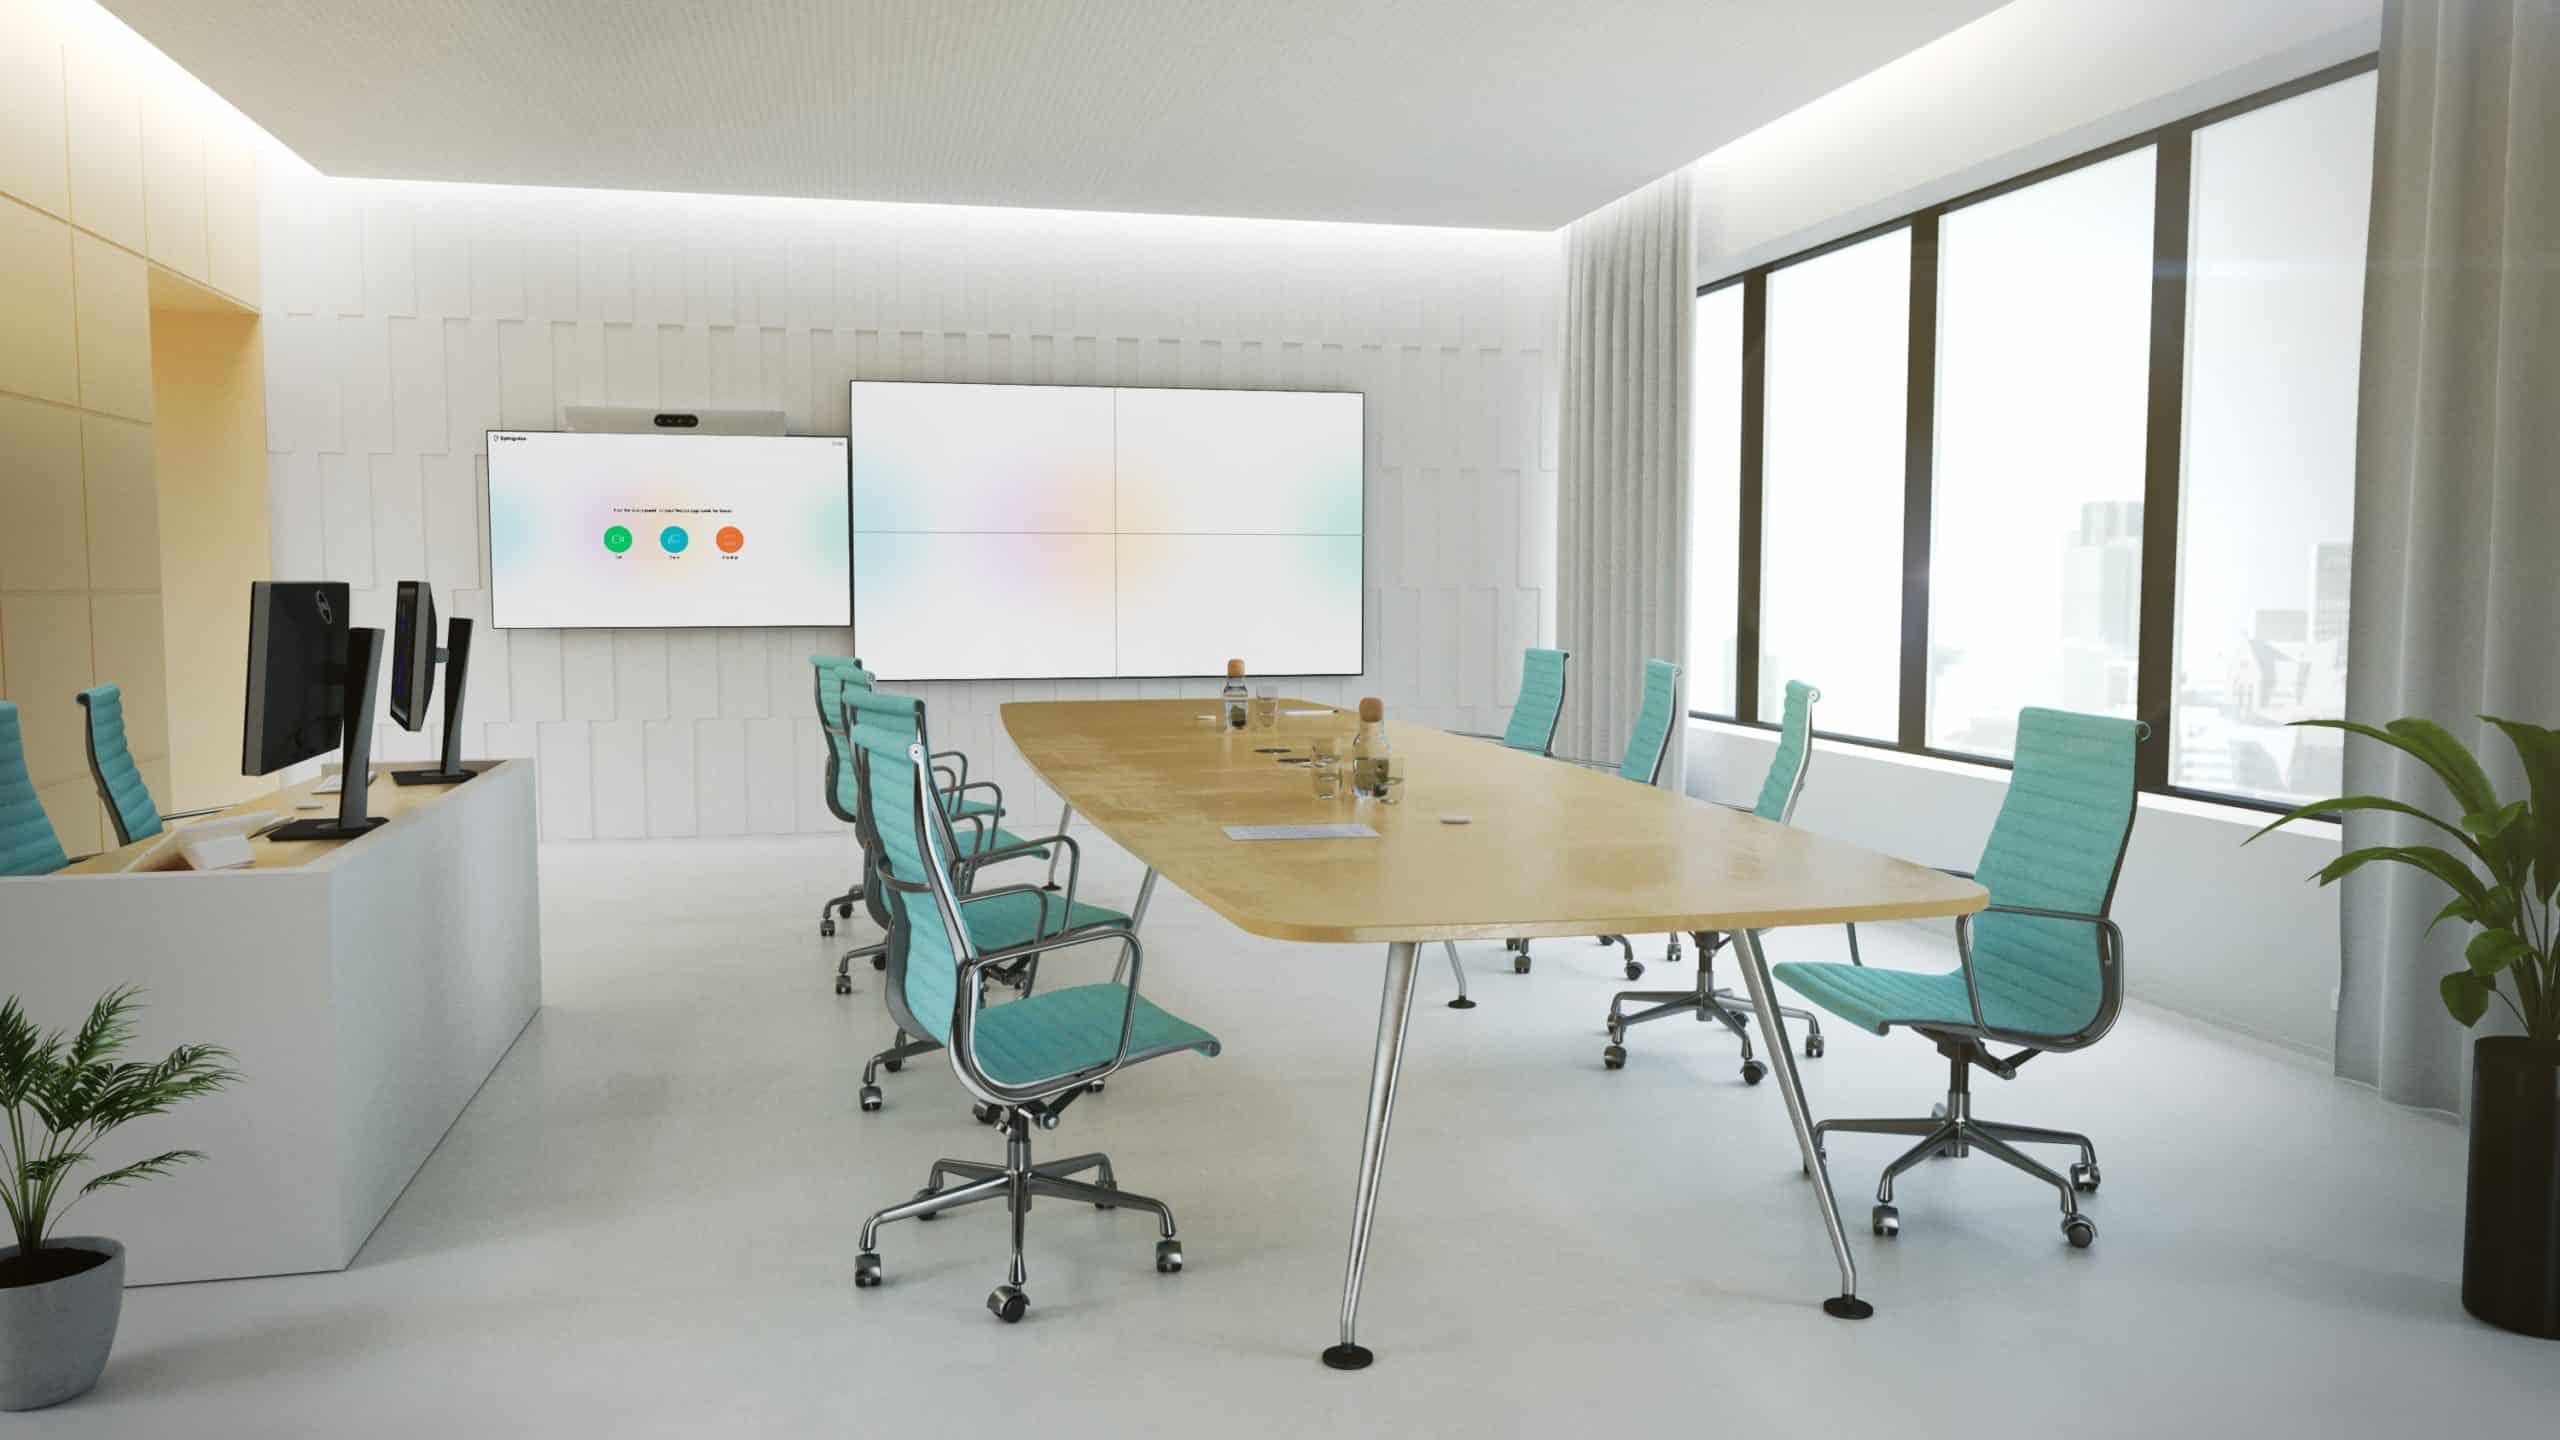 Cisco Webex meeting room technology to support meetings powered by AI